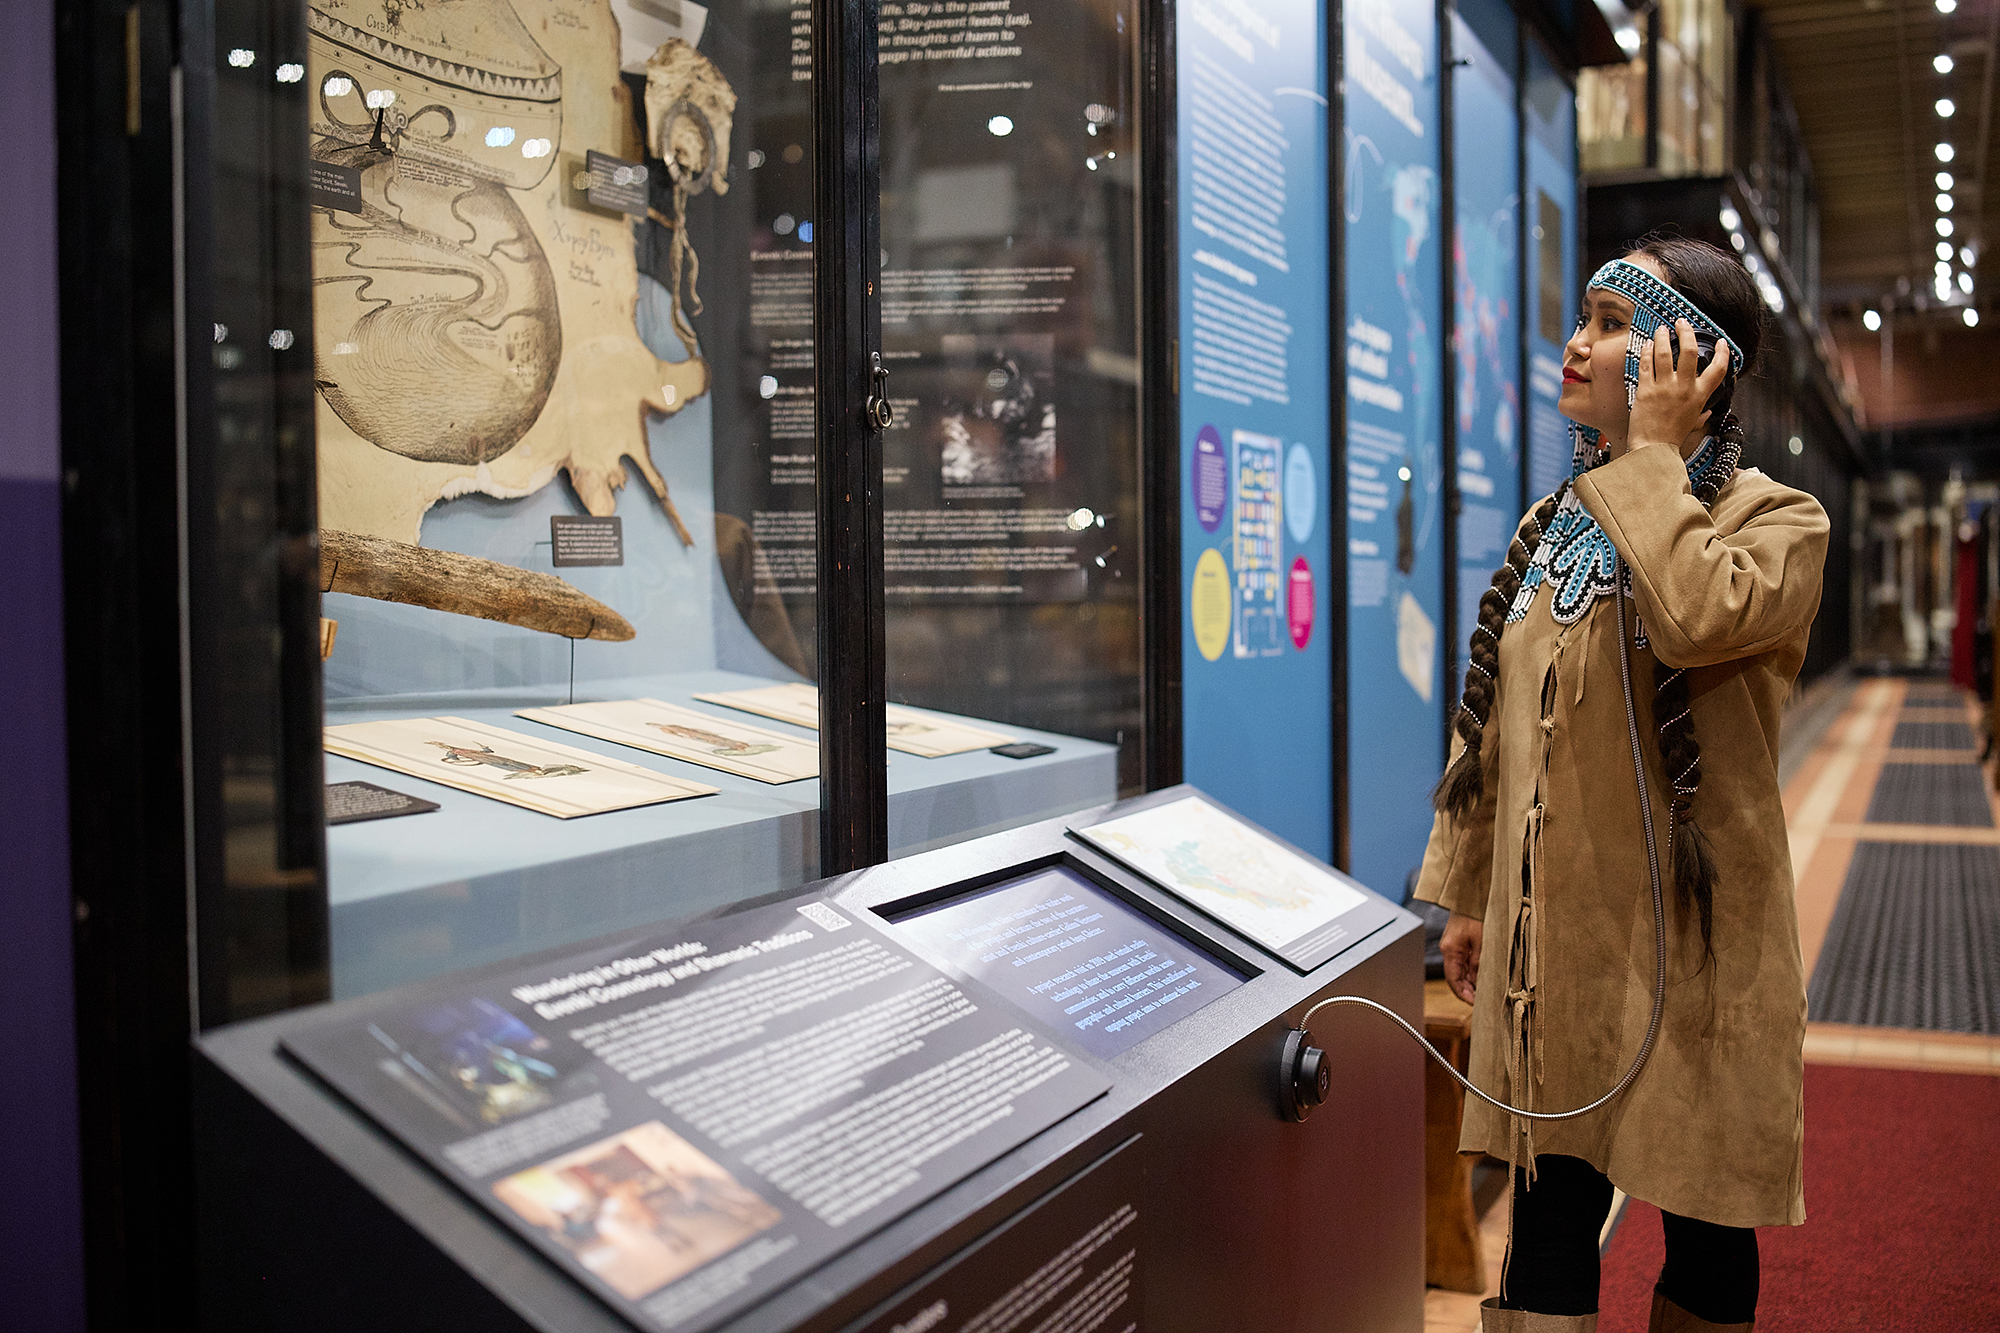 A woman stands smiling while looking at a display case showing objects from Evenkia in Sibera, holding a listening device to her ear.